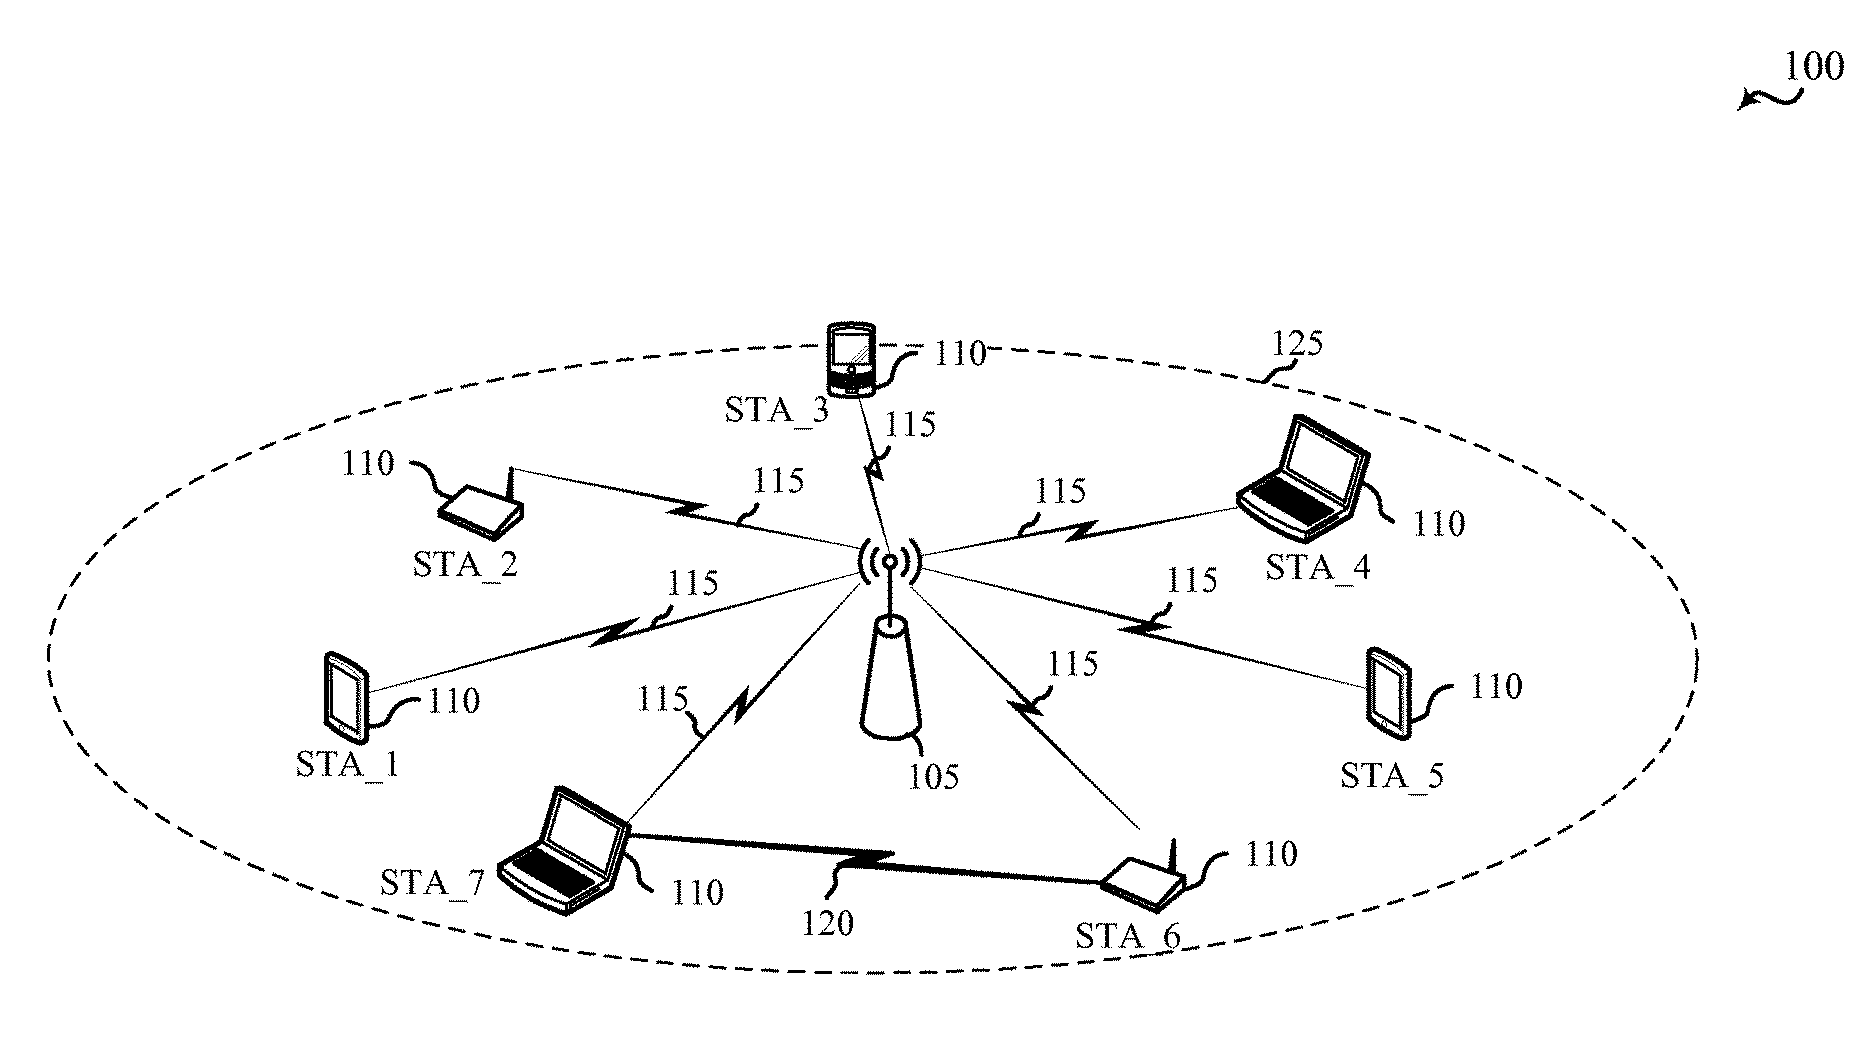 Congestion based roaming in a wireless local area network